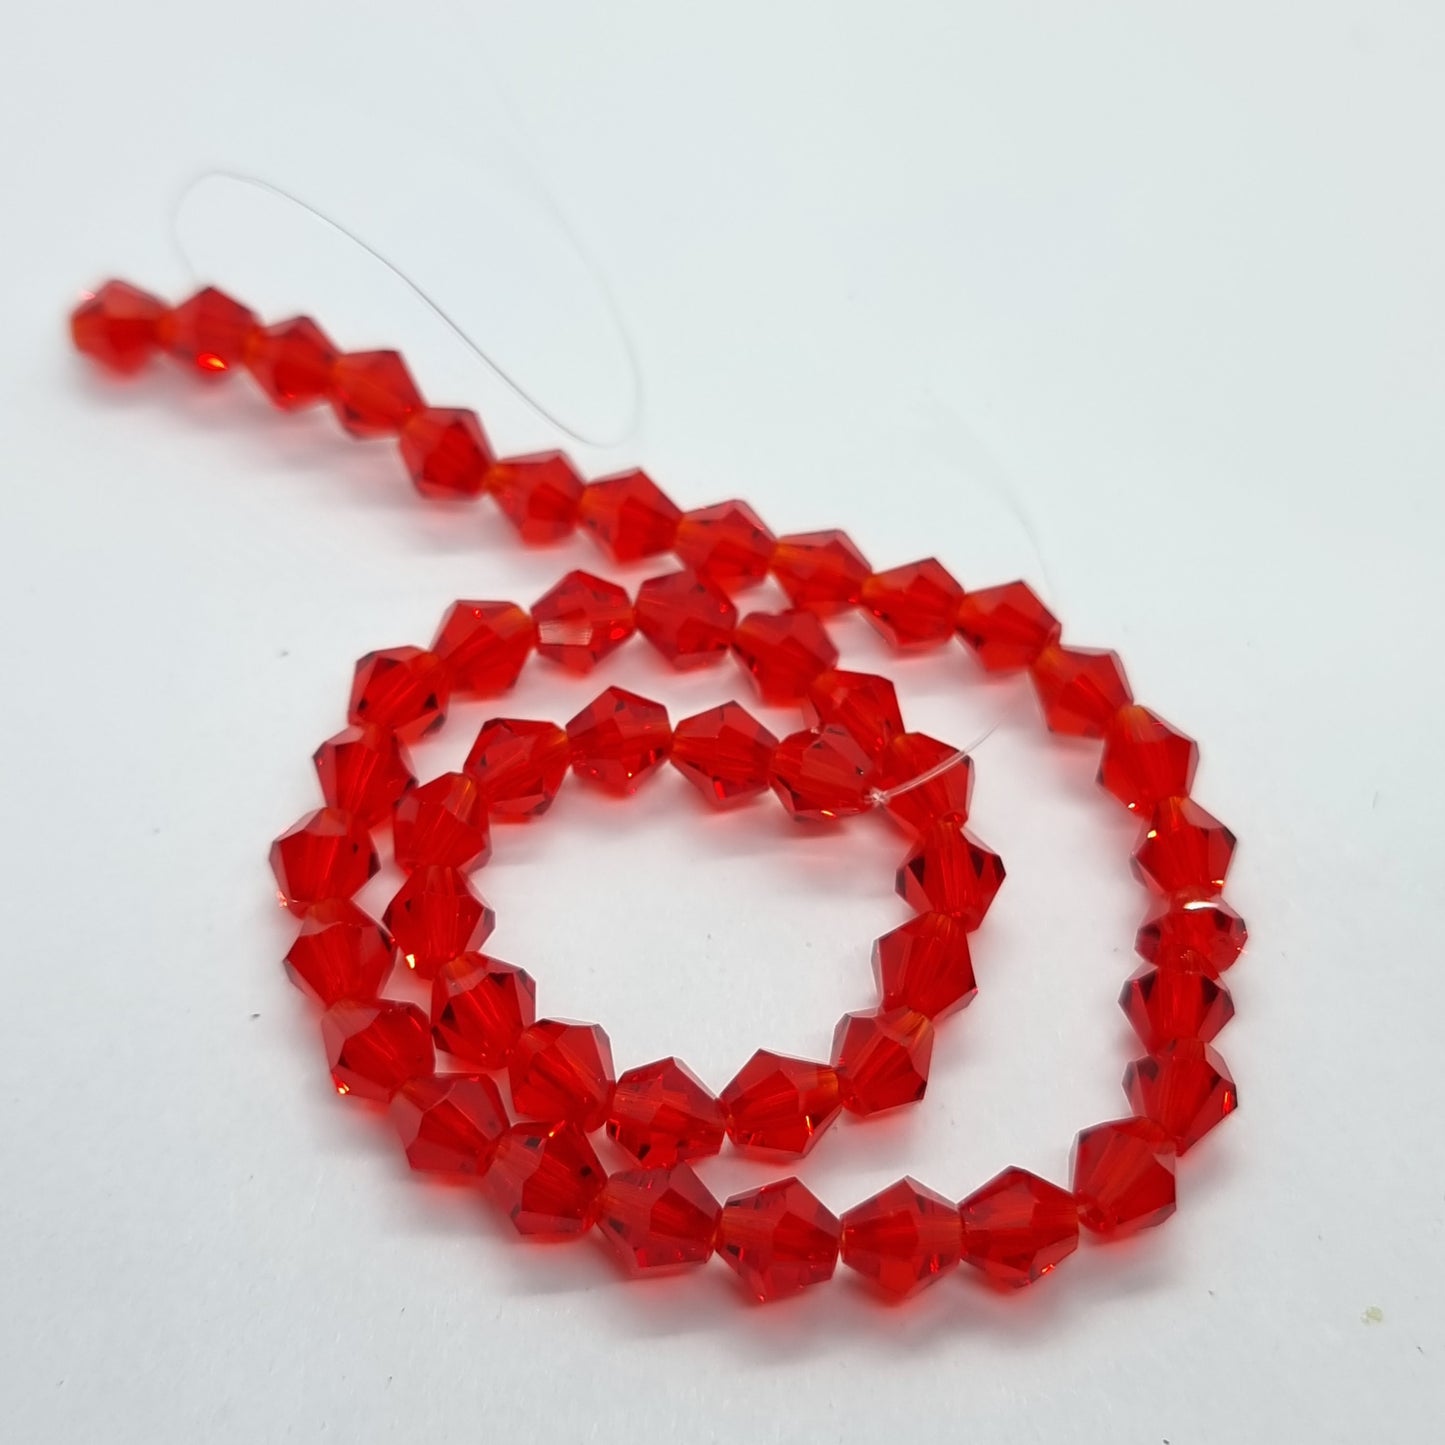 6mm Bright Red Glass Bicones